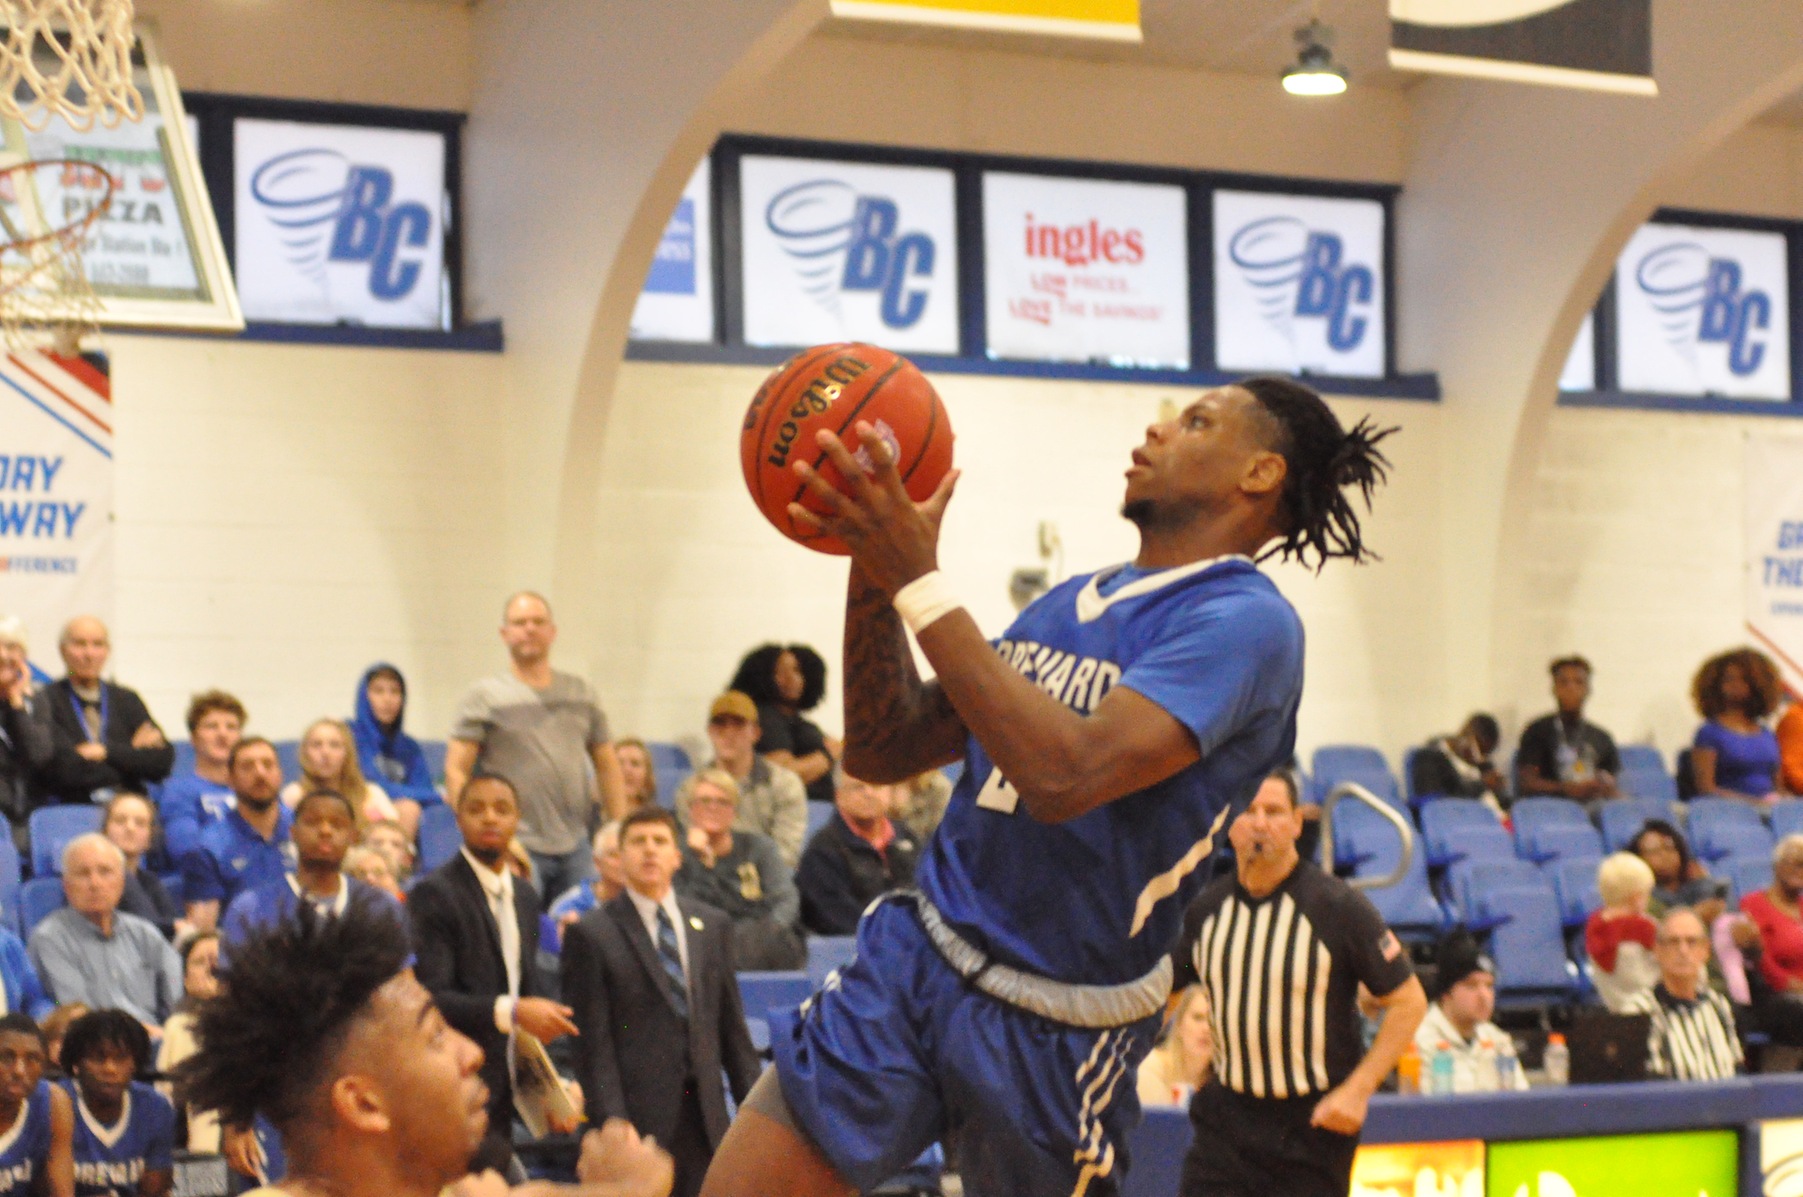 Senior guard Demari Hopper in action at The Bosh (Photo courtesy of Tommy Moss).